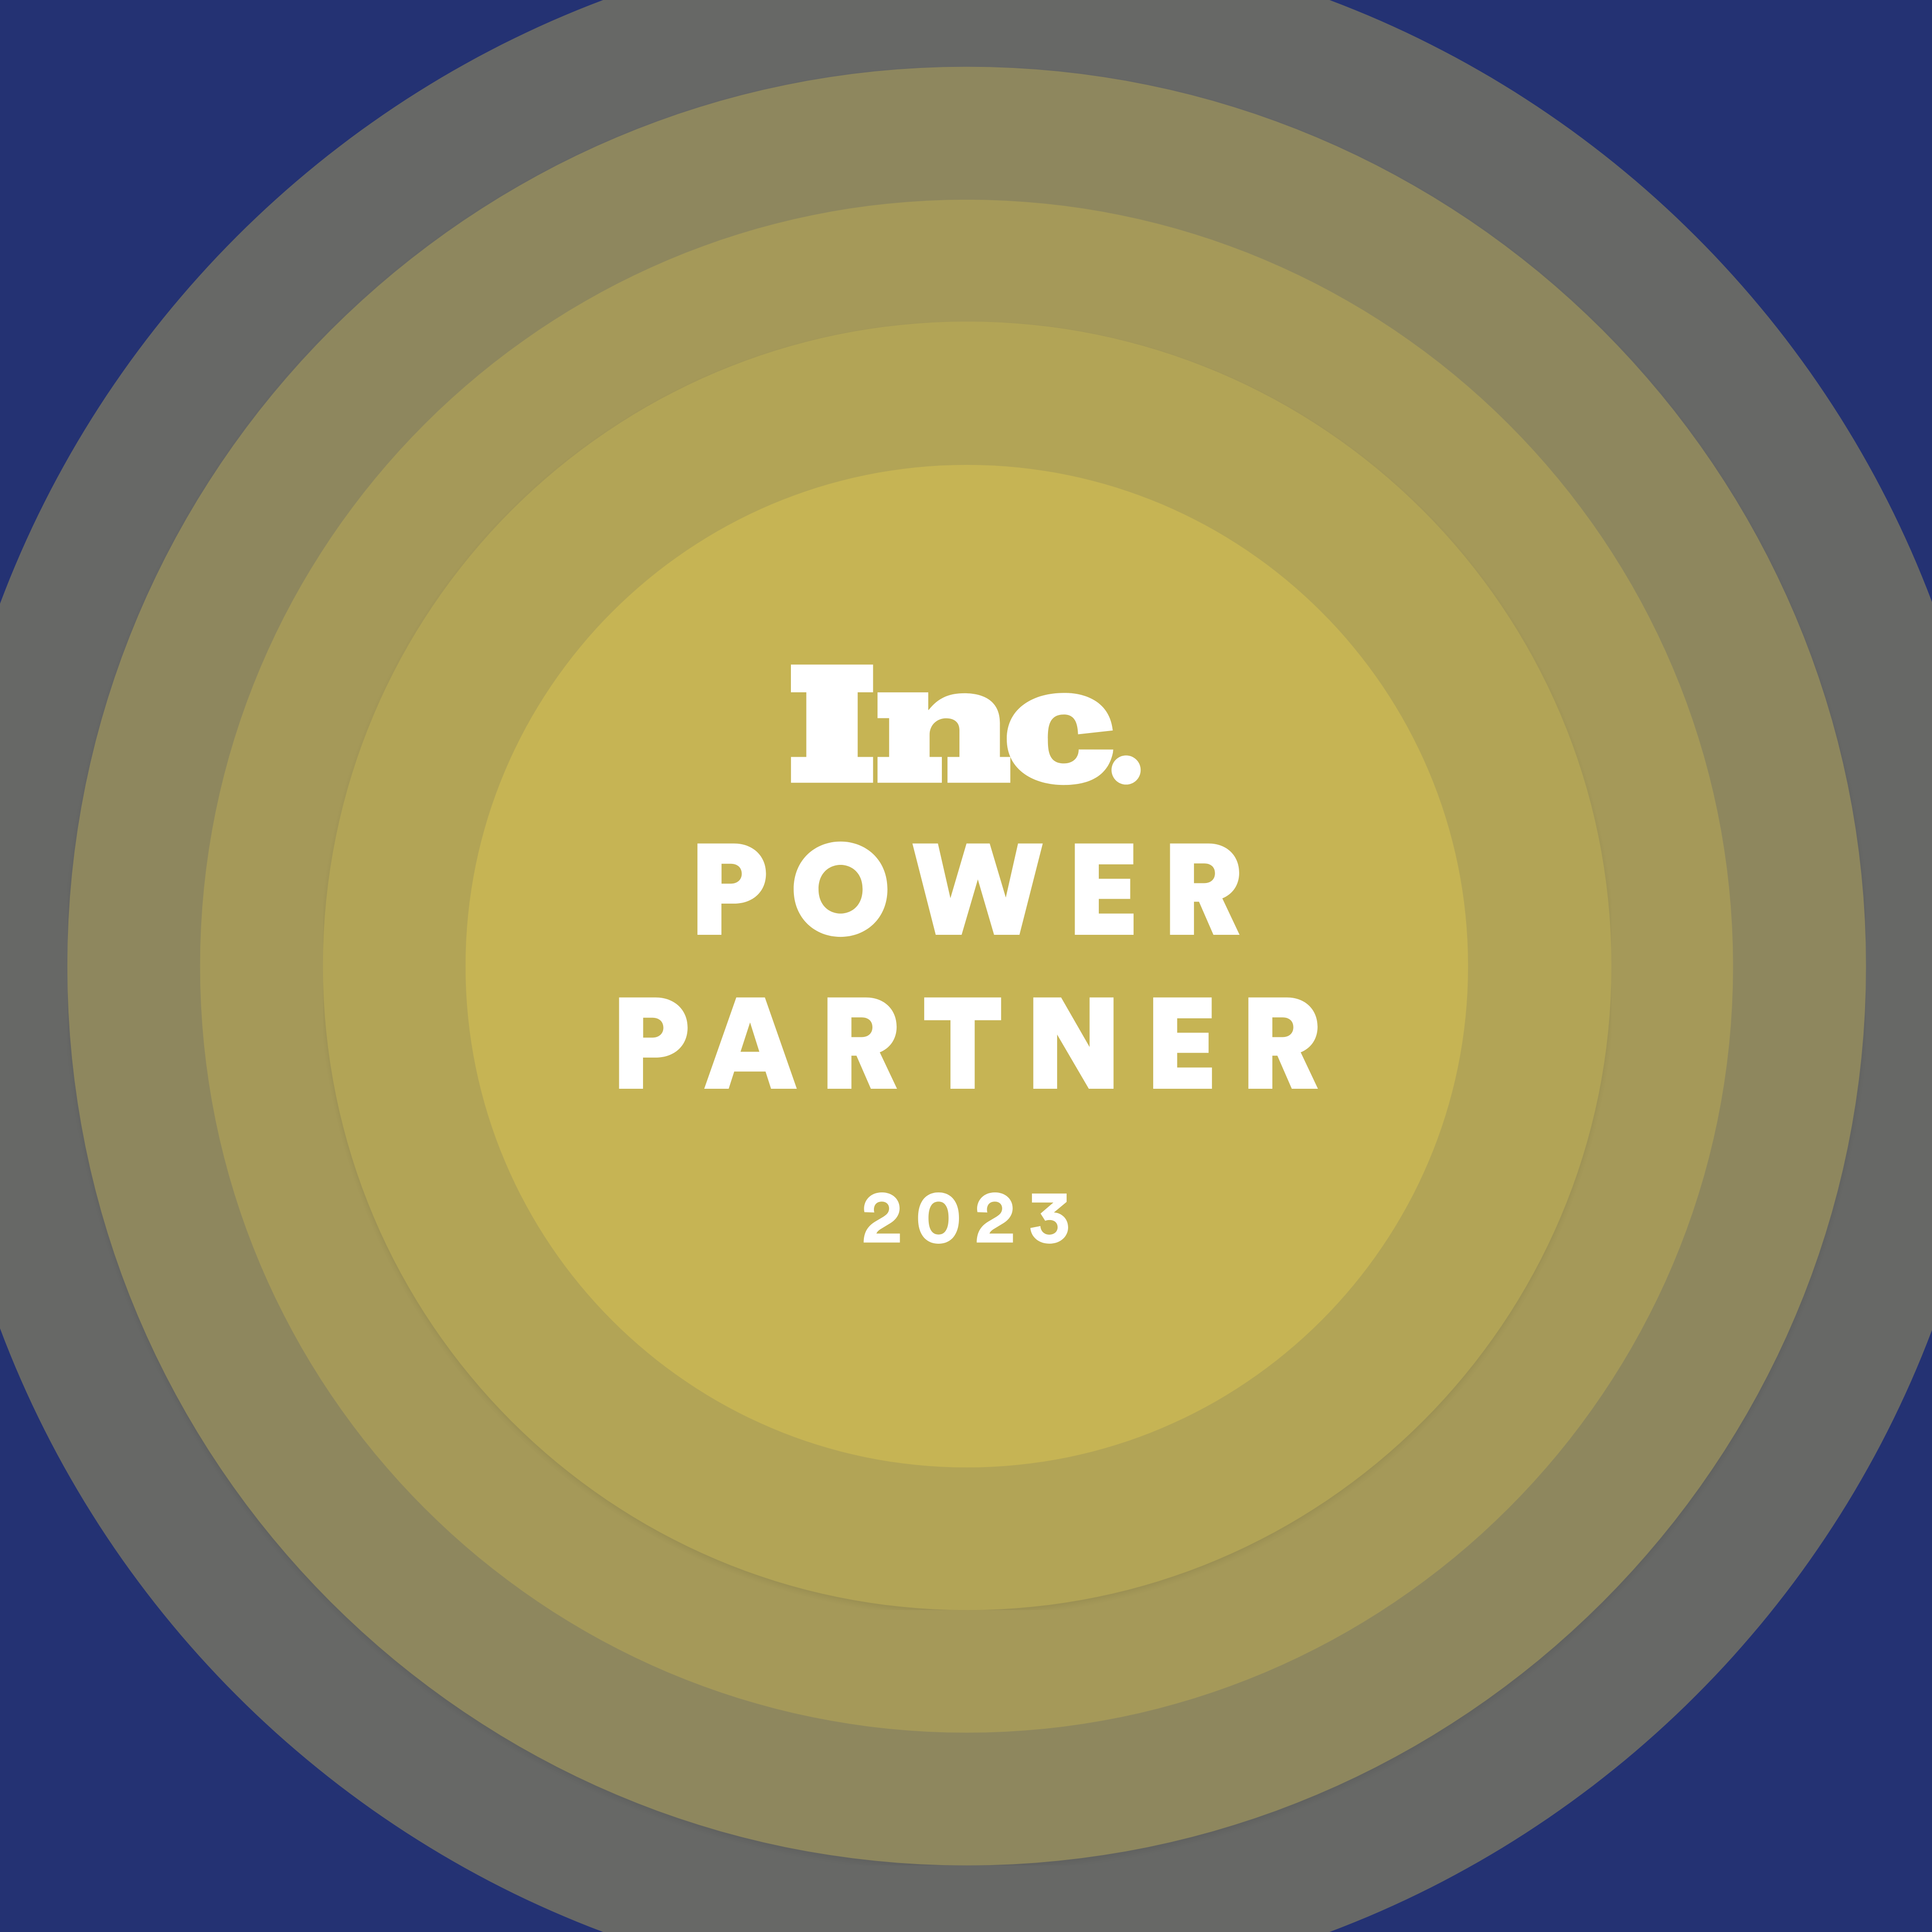 Cover Image for SmartCommerce Named to Inc.’s Power Partner Awards 2023